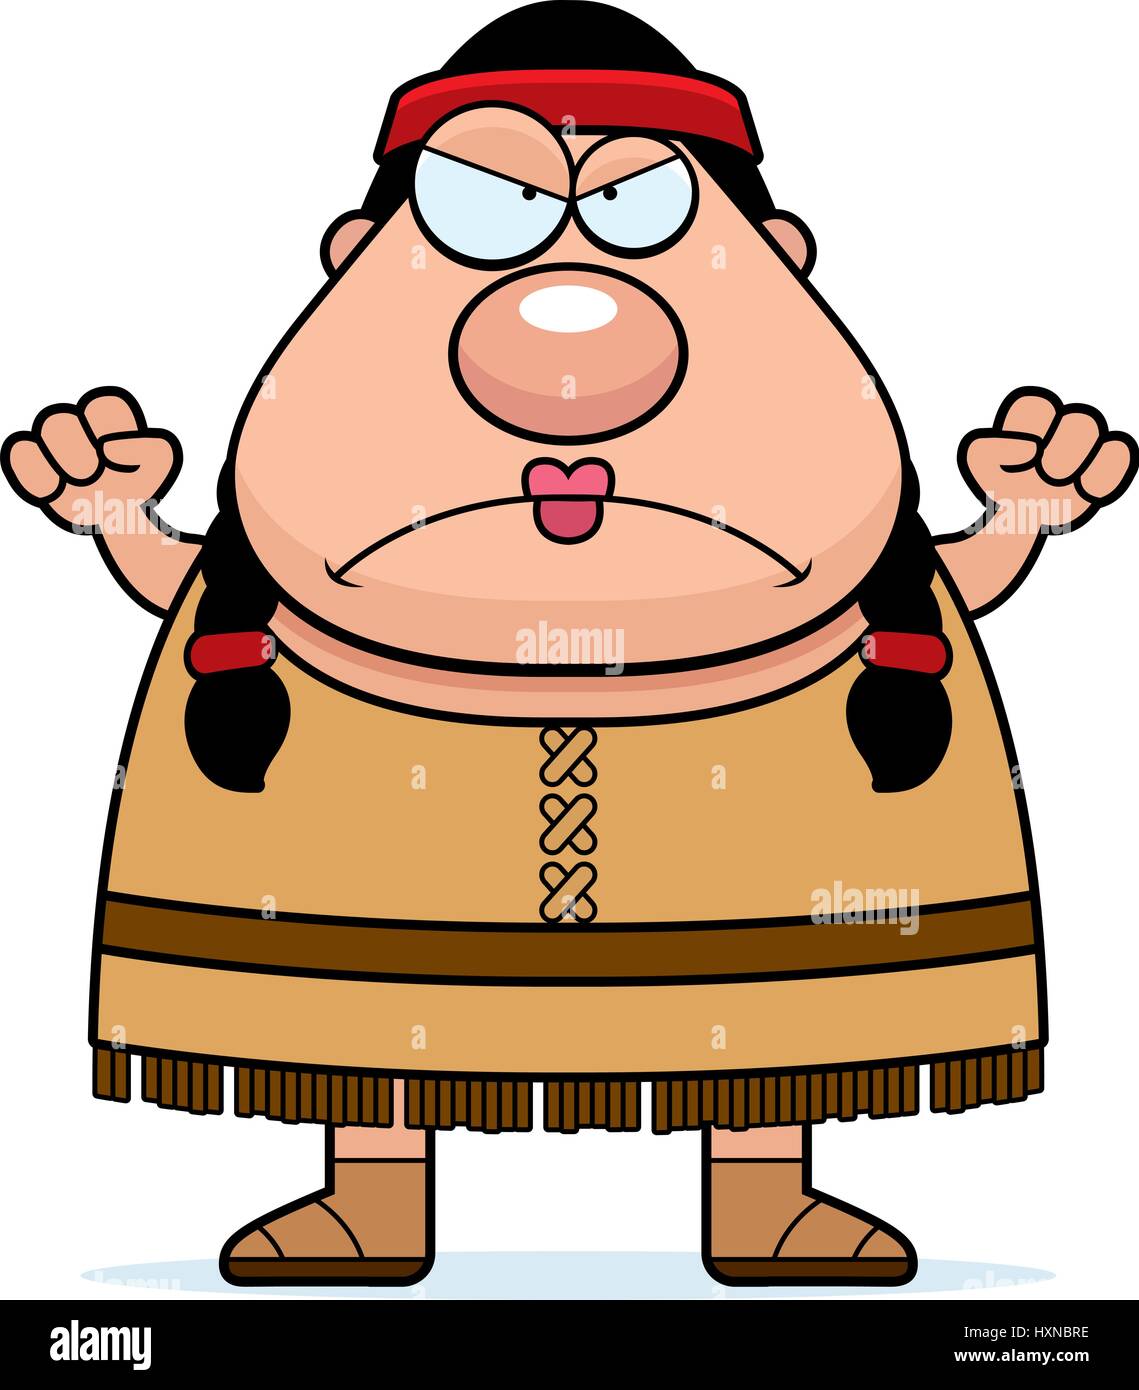 squaw clipart indian